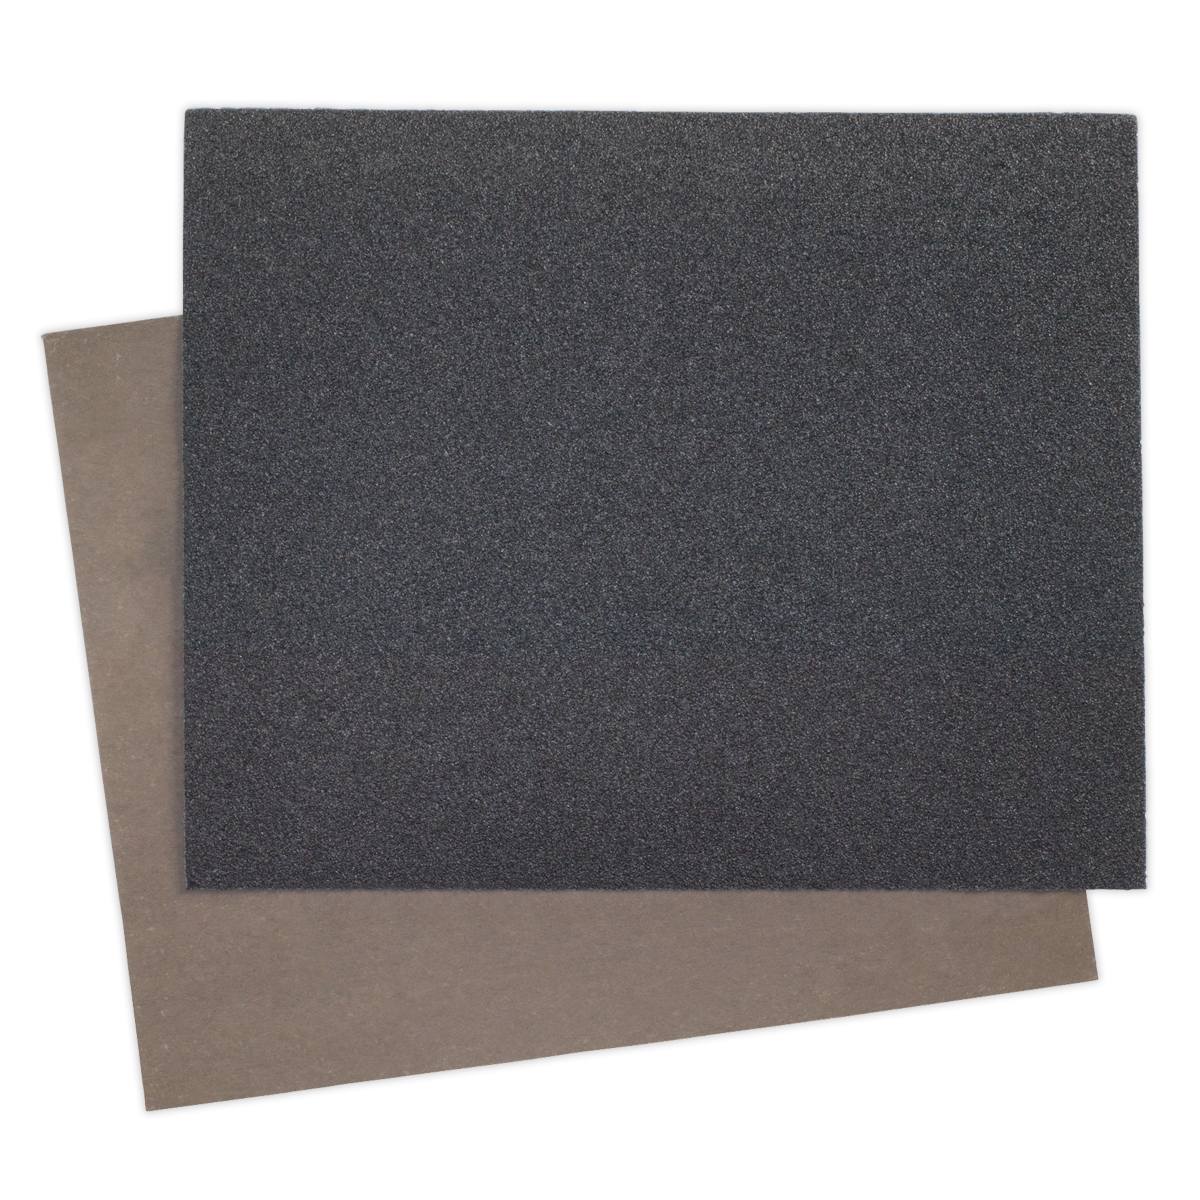 Wet & Dry Paper 230 x 280mm 180Grit Pack of 25 - WD2328180 - Farming Parts